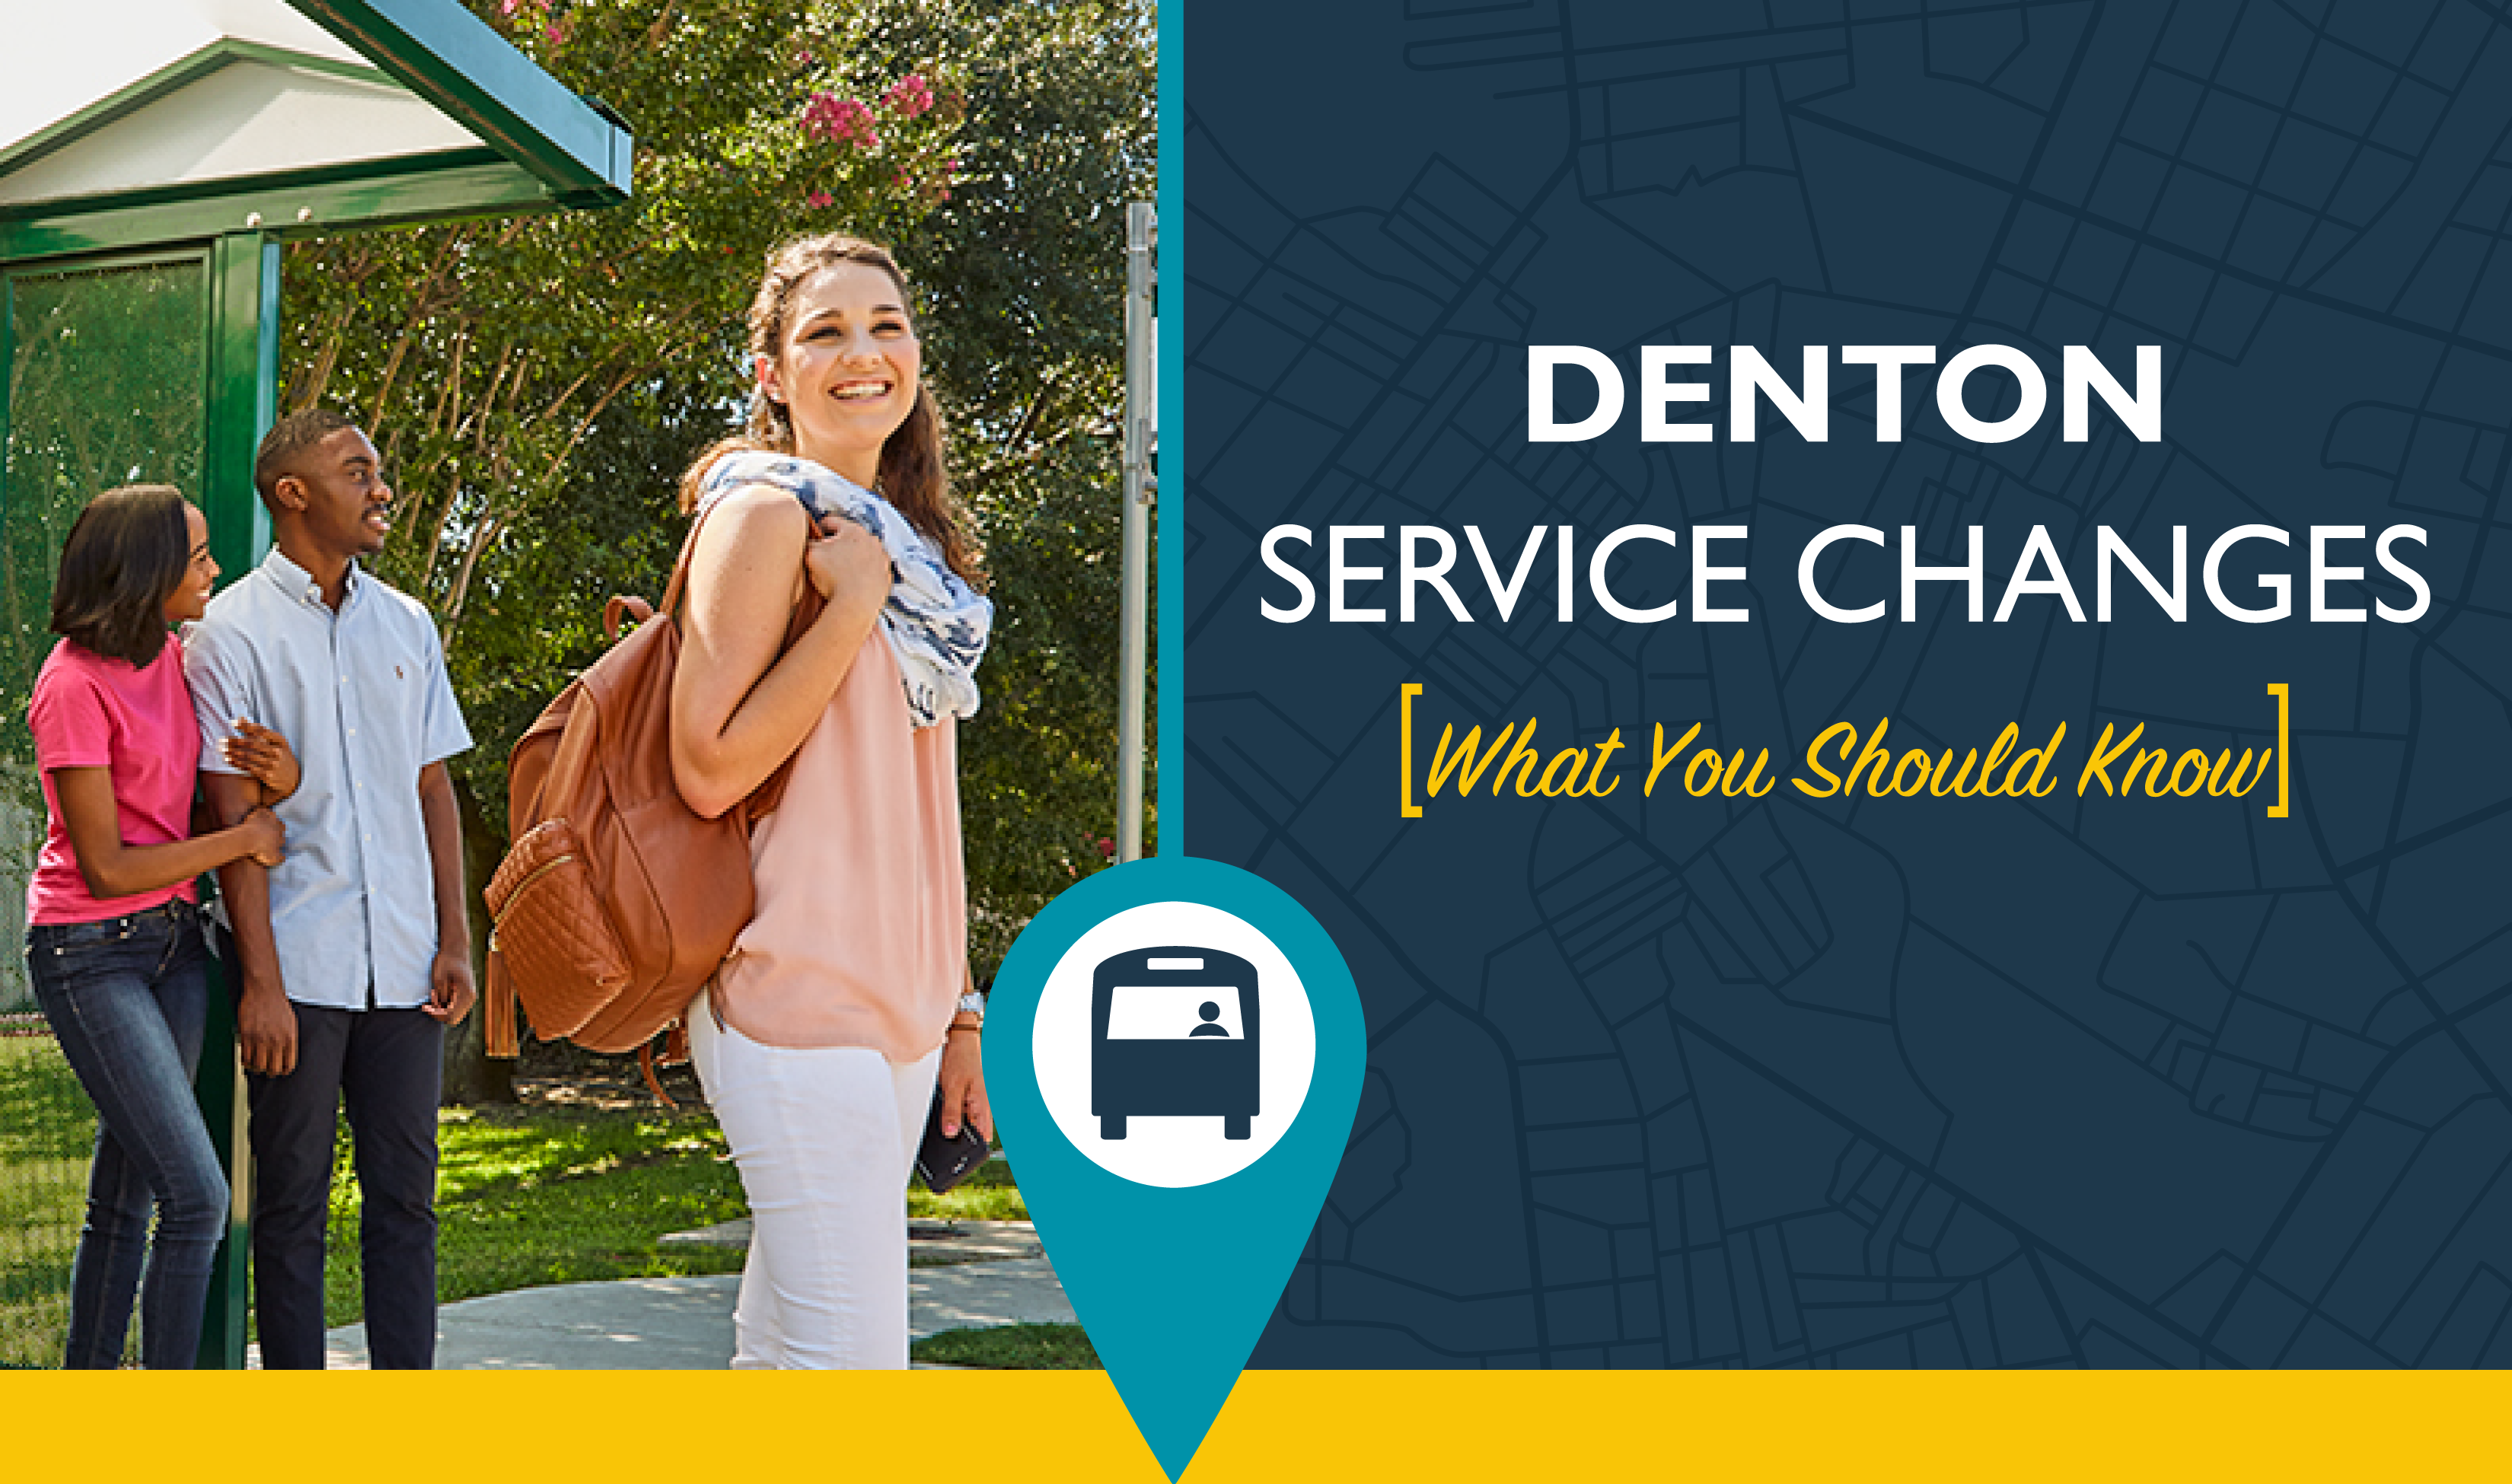 The Five W’s of the Upcoming Denton Connect Bus Service Changes